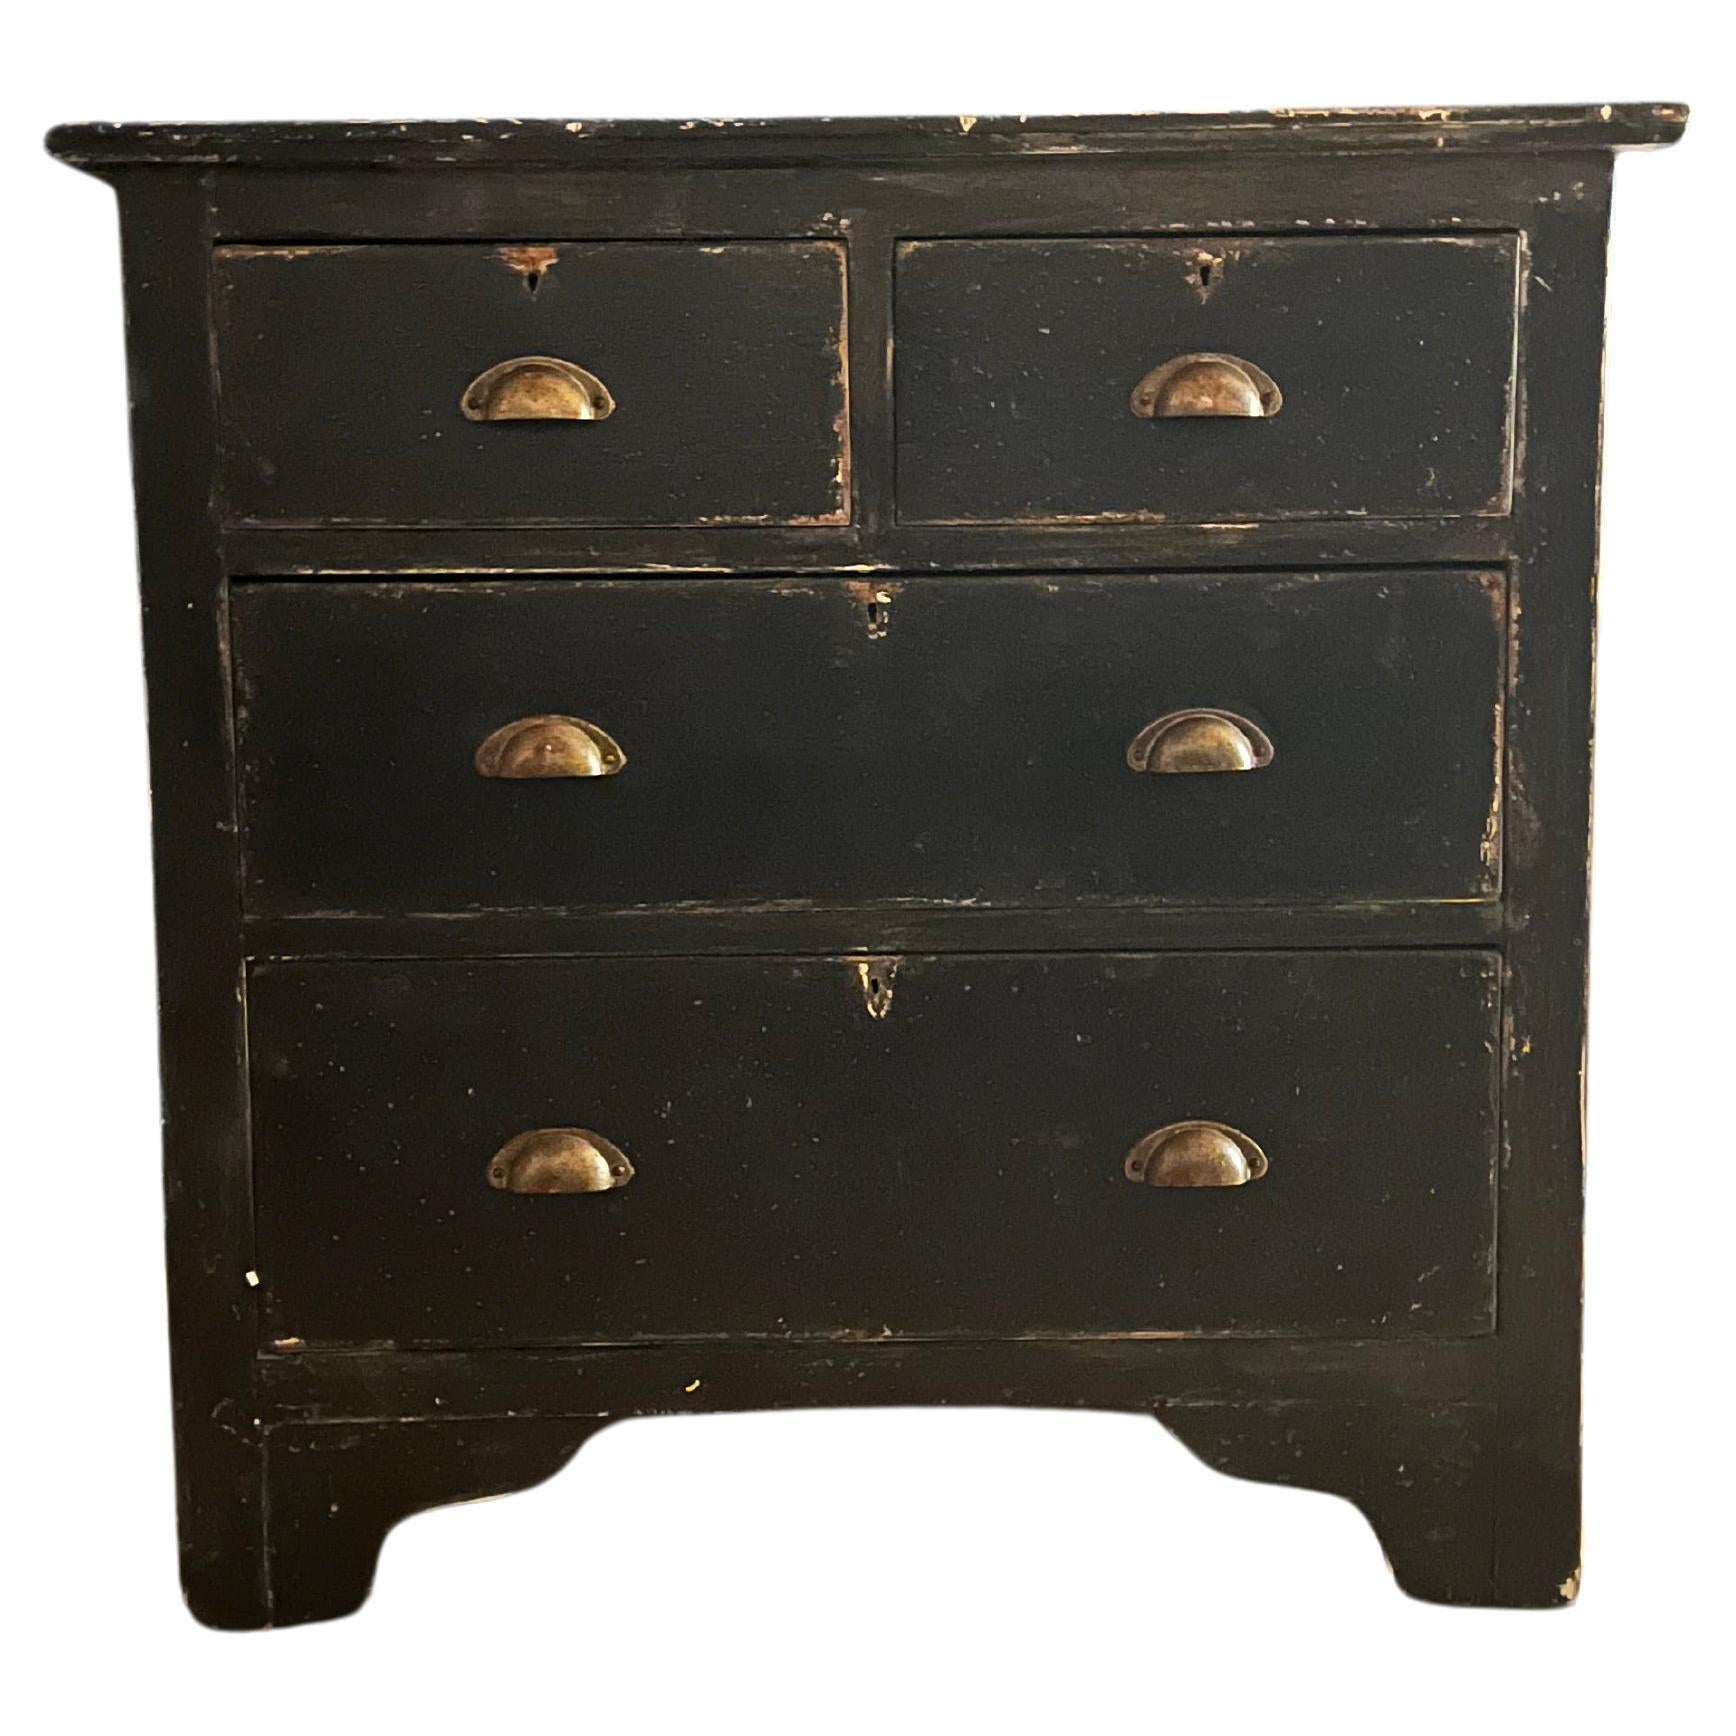 This French ebonised distressed Pine chest of drawers/dresser, is a stunning piece of Vintage furniture from the 1930s. This piece was sourced in Le Harve France, the ebonised finish adds a touch of sophistication to the distressed pine, creating a